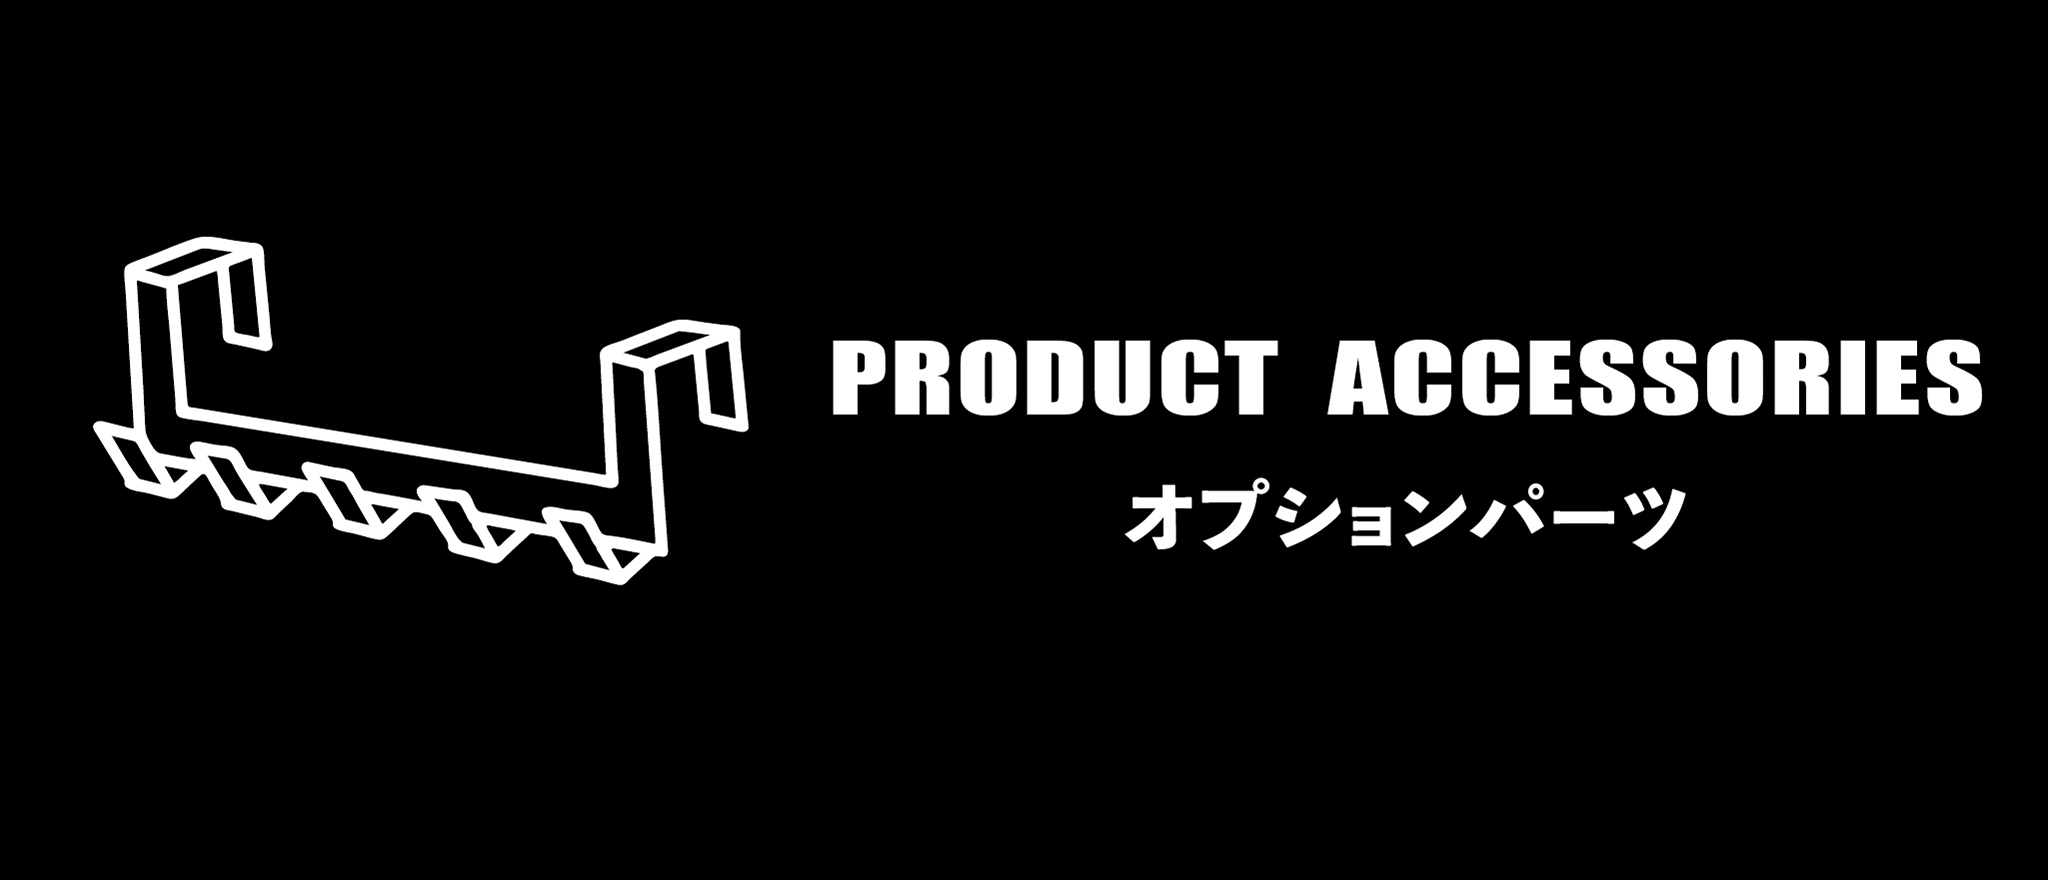 PRODUCT ACCESSORIES